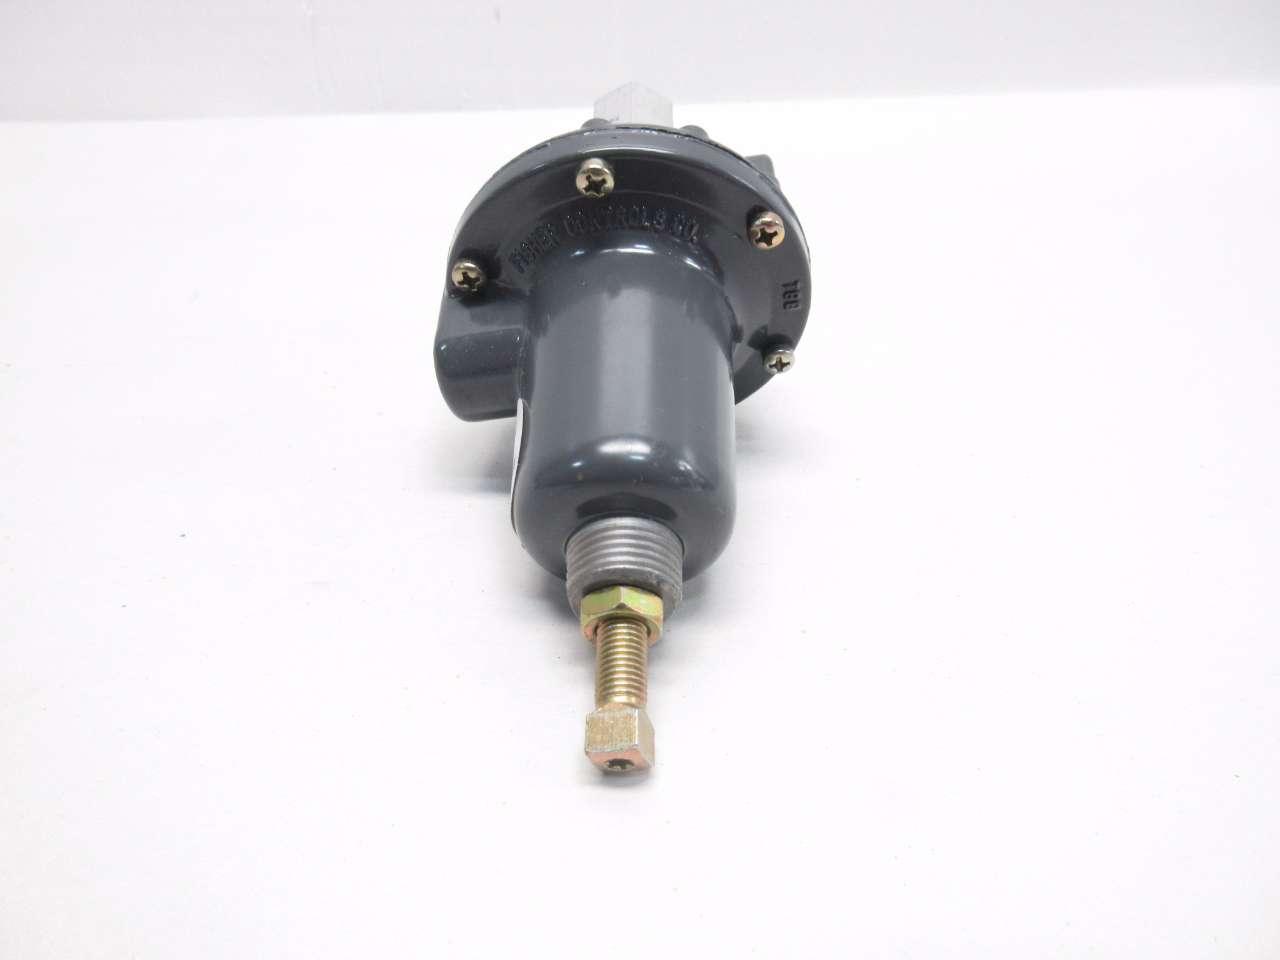 Details about   Fisher 167A-26 Pneumatic Regulator 250psi 20-80psi 1/4in Npt 